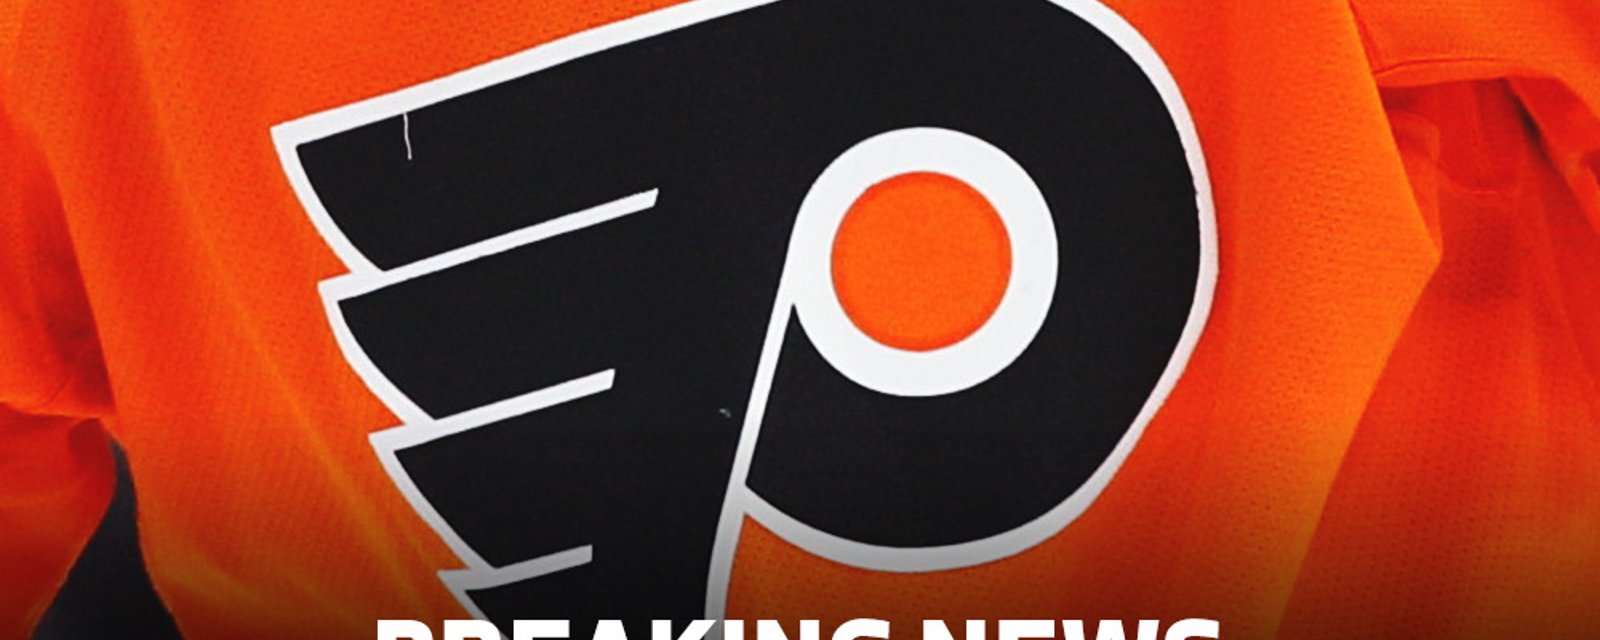 BREAKING: Flyers inked a new deal with promising forward!